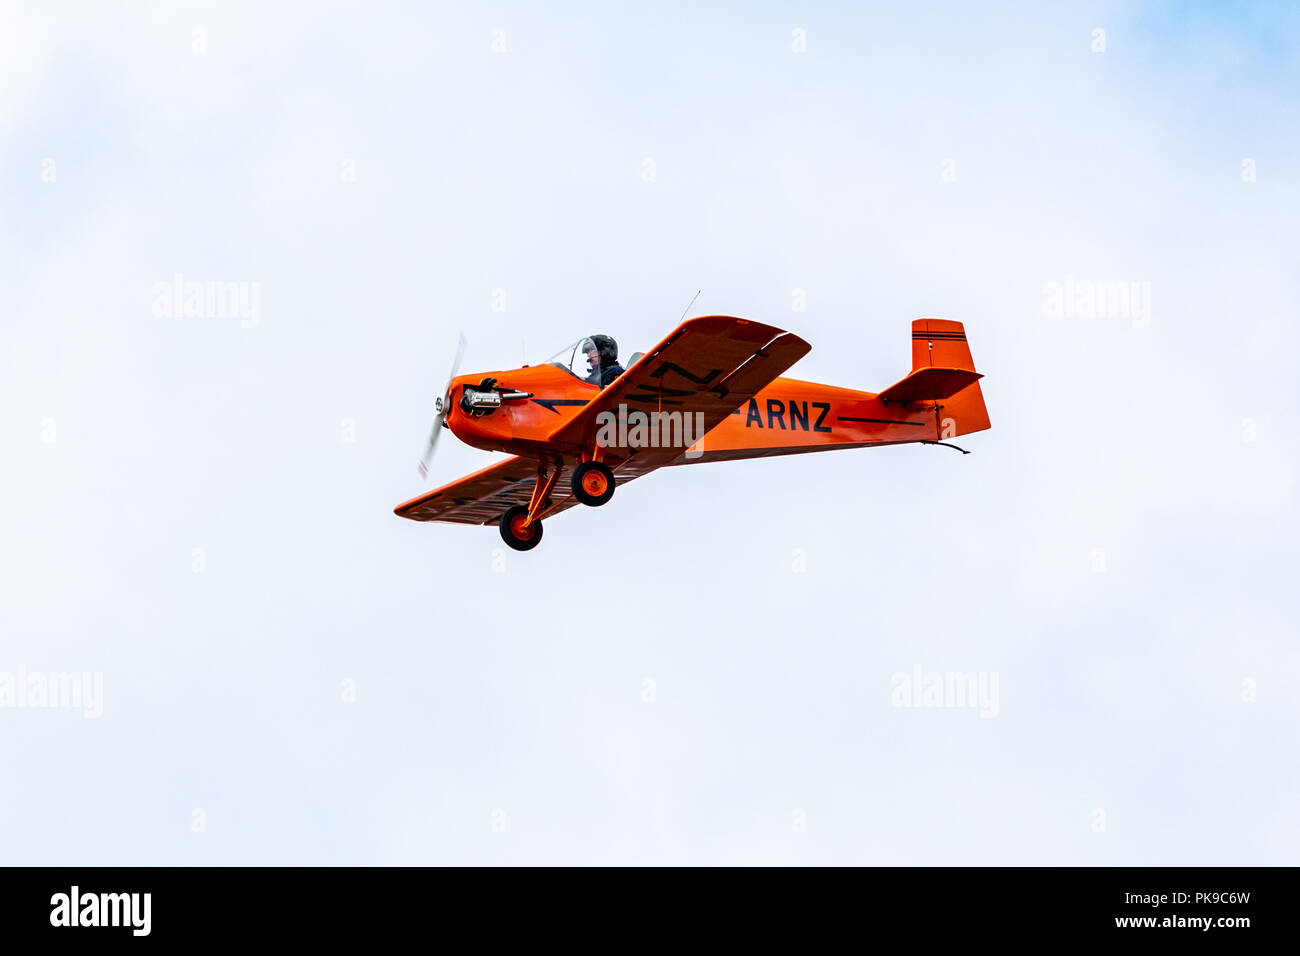 A characterful bright orange Tiger Club D31 Turbulent single seater in level flight during an air display Stock Photo